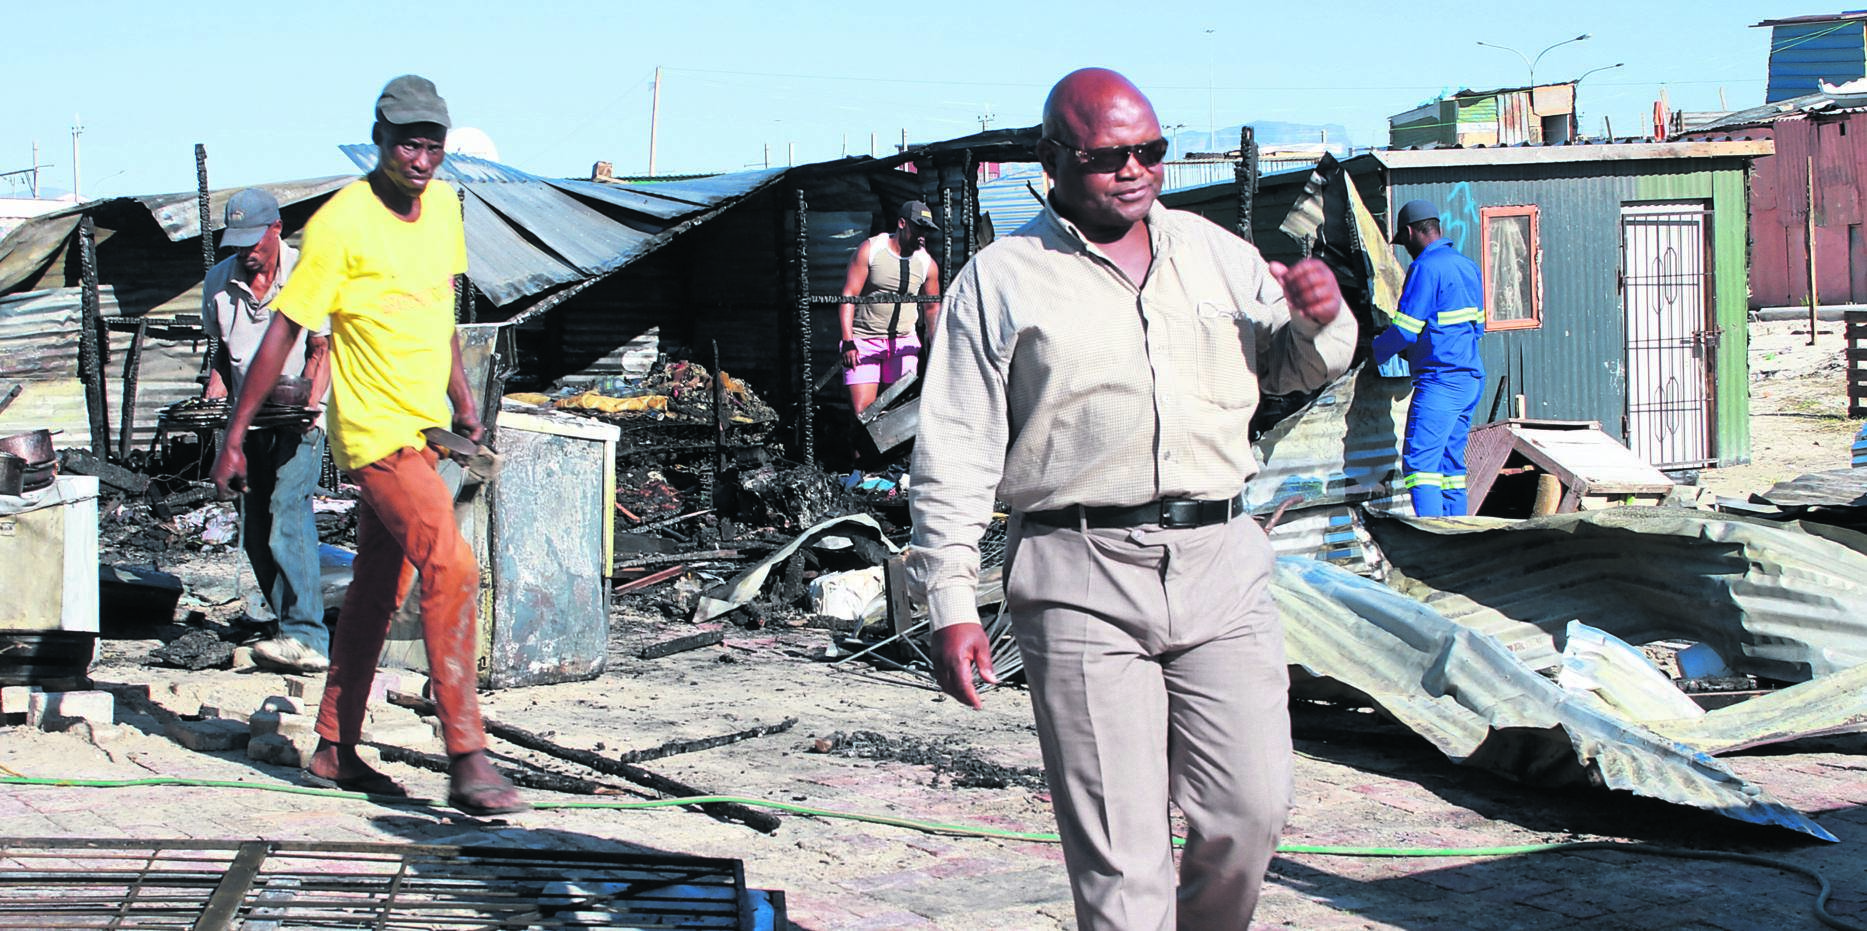 Residents Nceba Nkomane and Mzwandile Rasmeni lost all their belongings in the fire on Wednesday night. Photo by Lindile Mbontsi